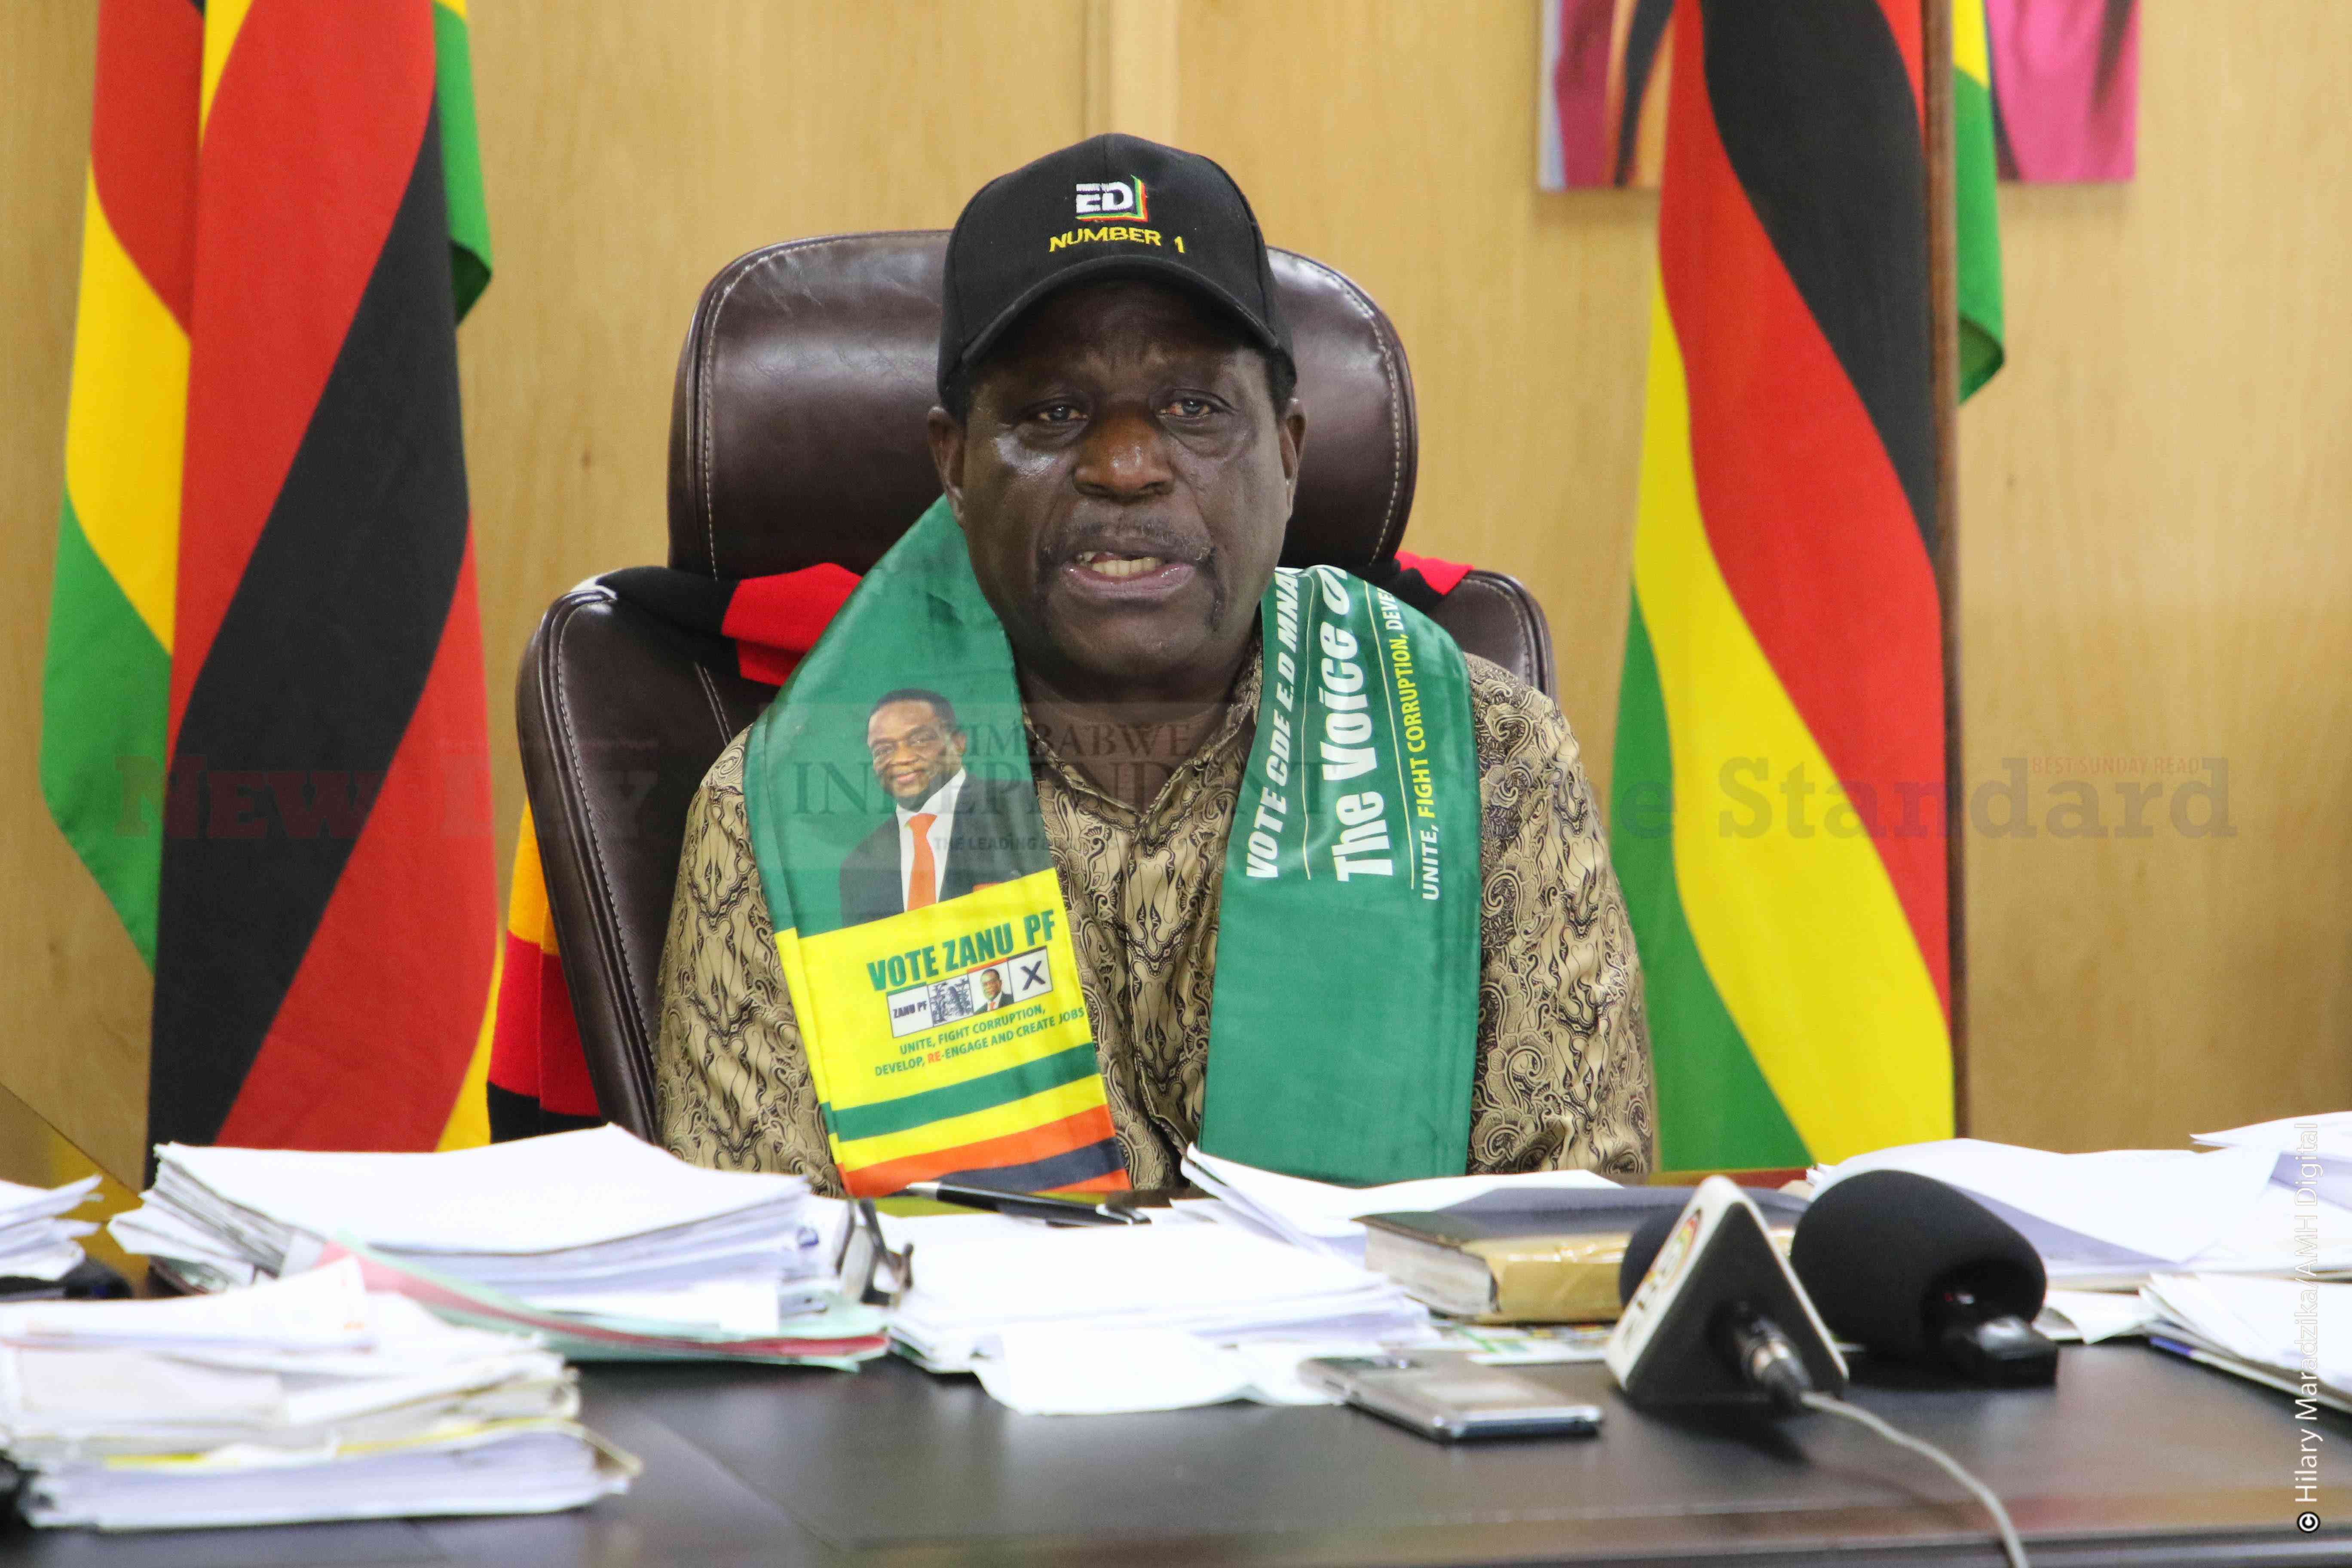 In Pictures: Zanu PF national political commissar Mike Bimha at a press conference